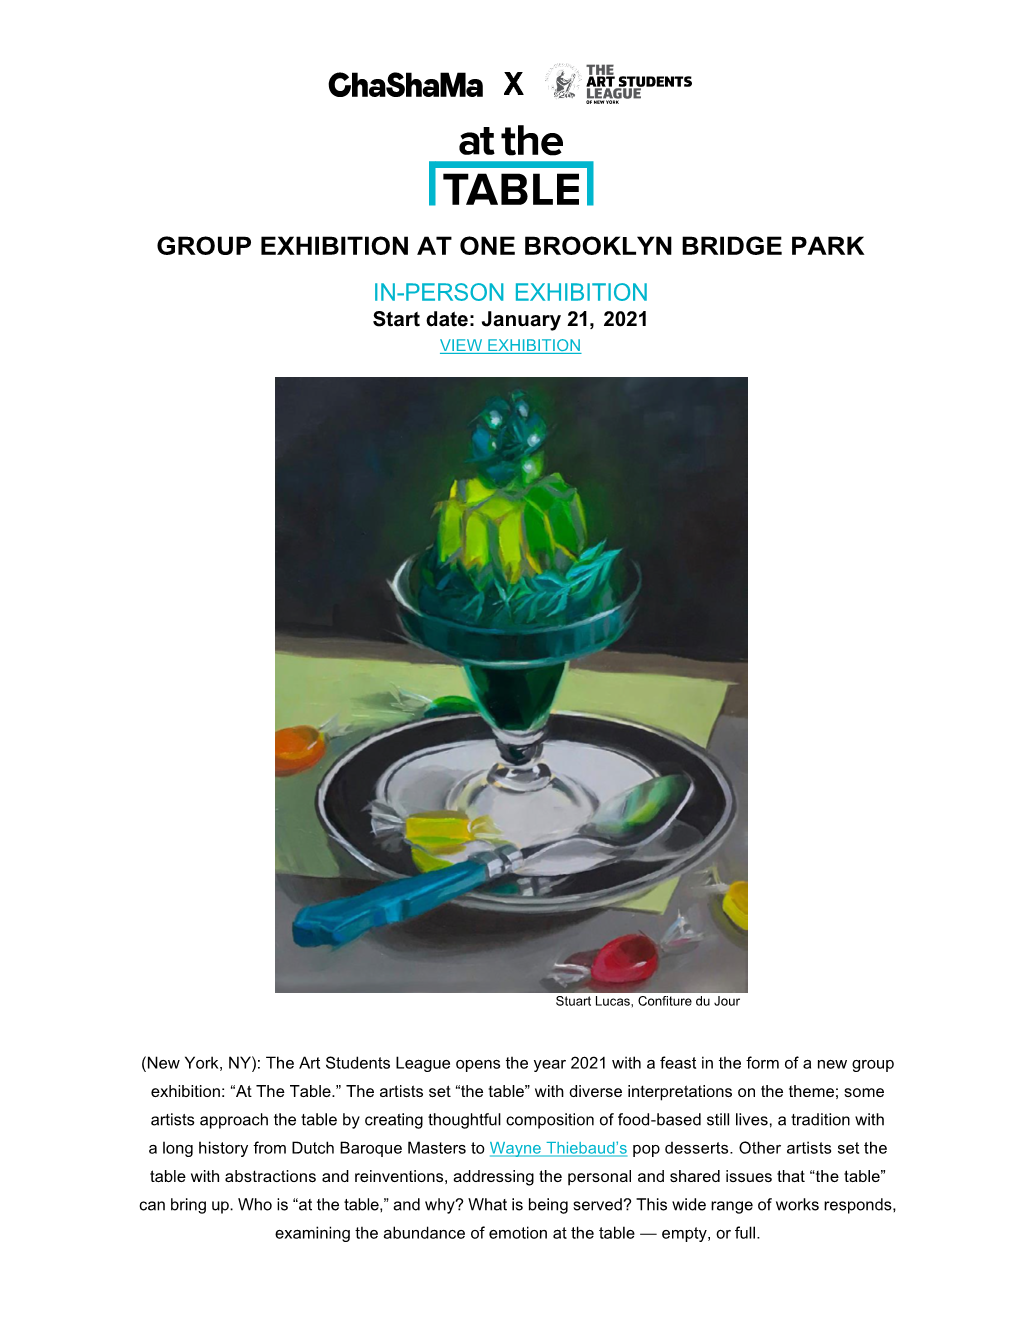 GROUP EXHIBITION at ONE BROOKLYN BRIDGE PARK IN-PERSON EXHIBITION Start Date: January 21, 2021 VIEW EXHIBITION